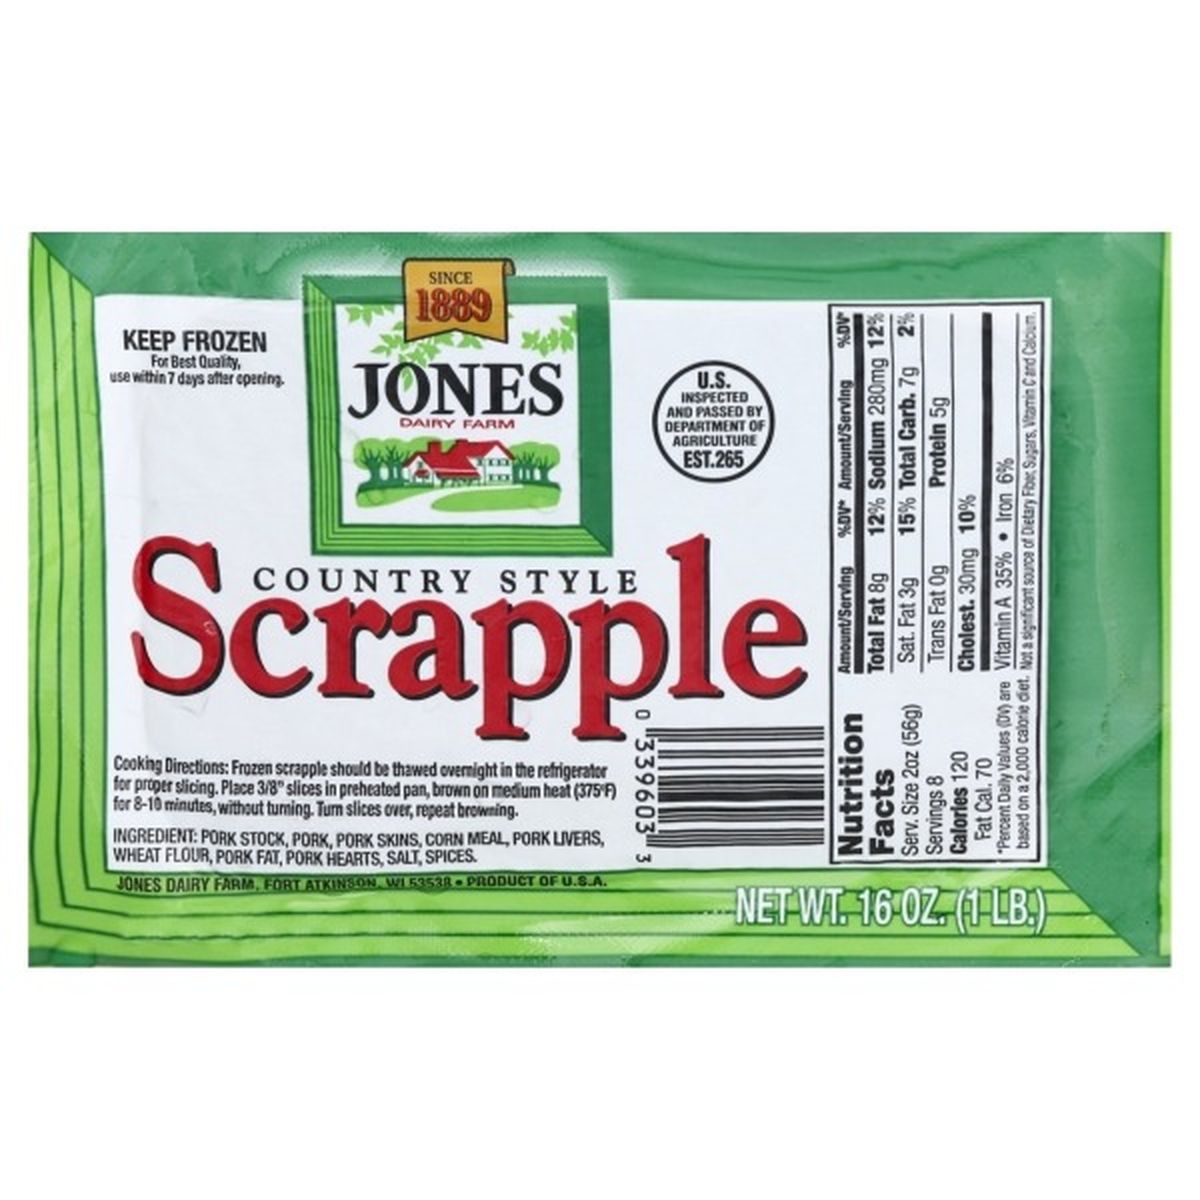 Calories in Jones Dairy Farm Scrapple, Country Style